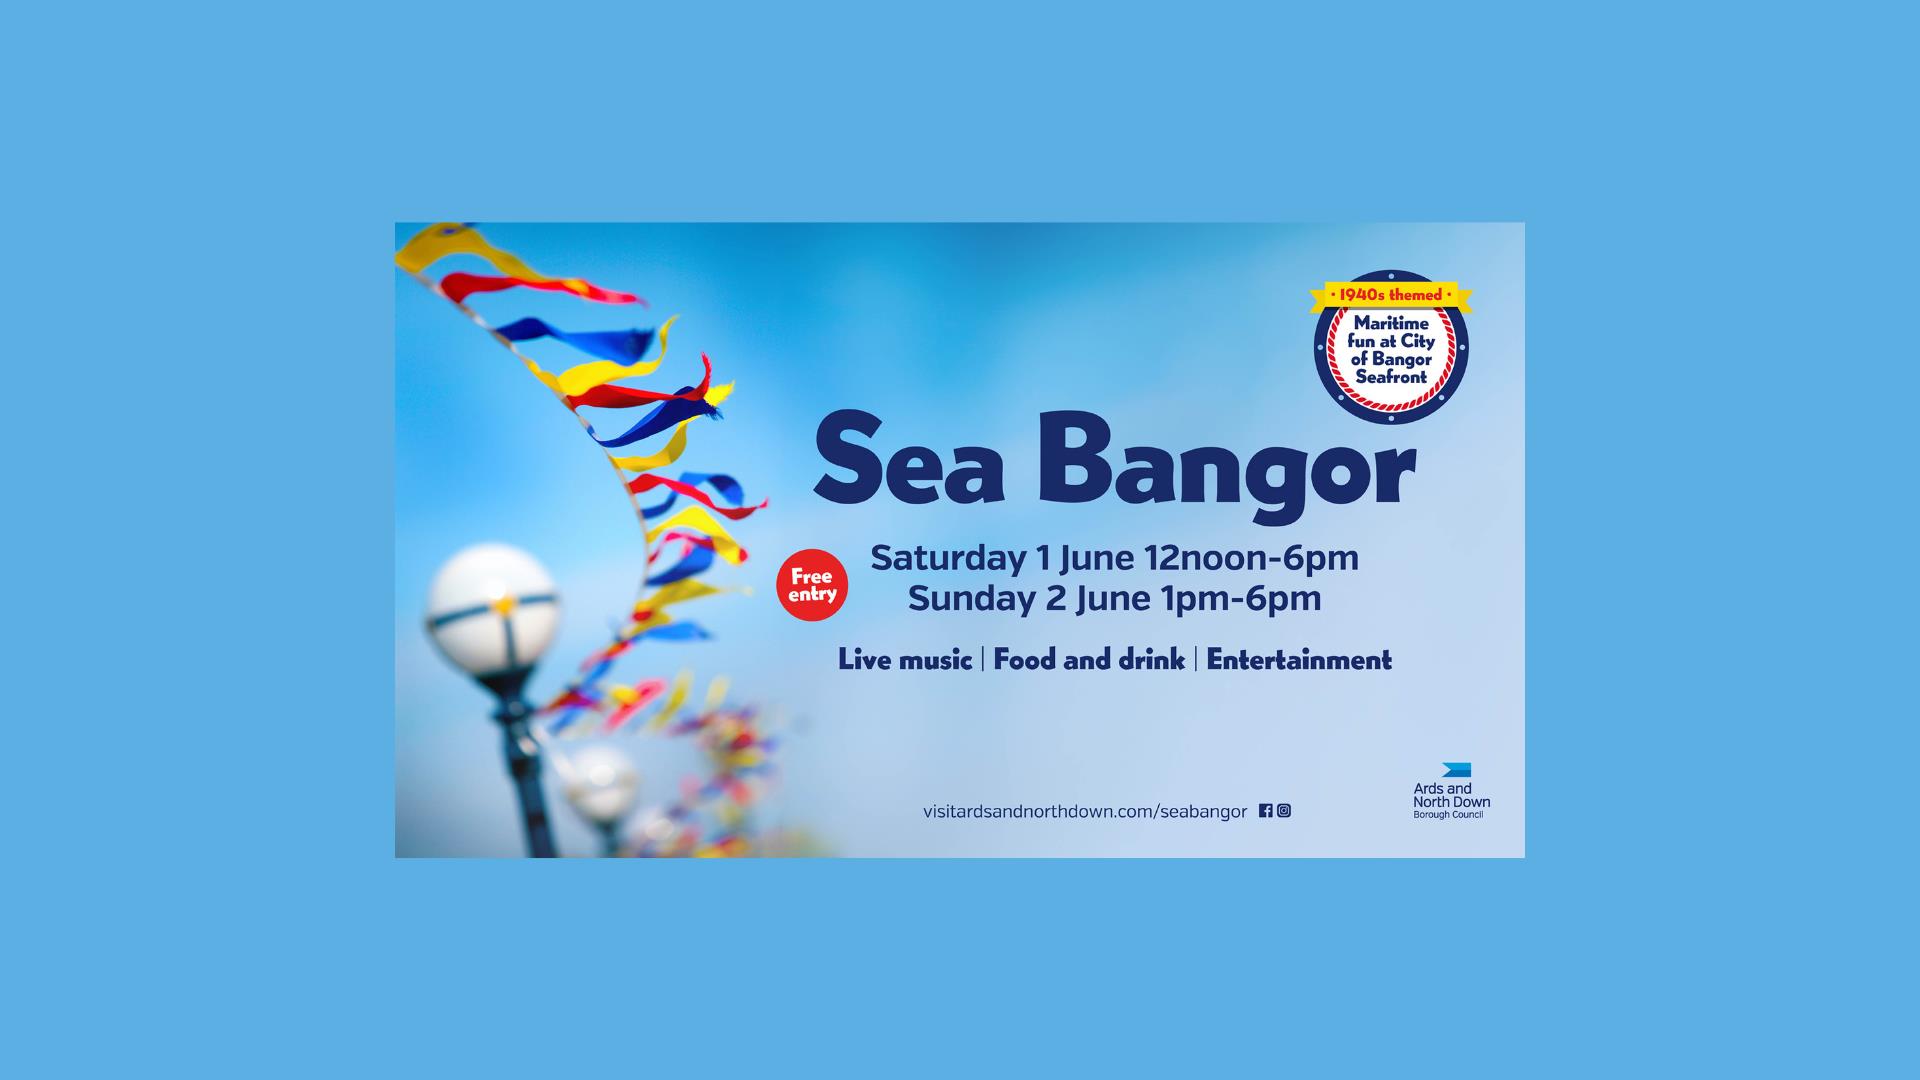 Artwork graphic, blue sky with yellow, blue and red bunting flying and event details, time and dates.